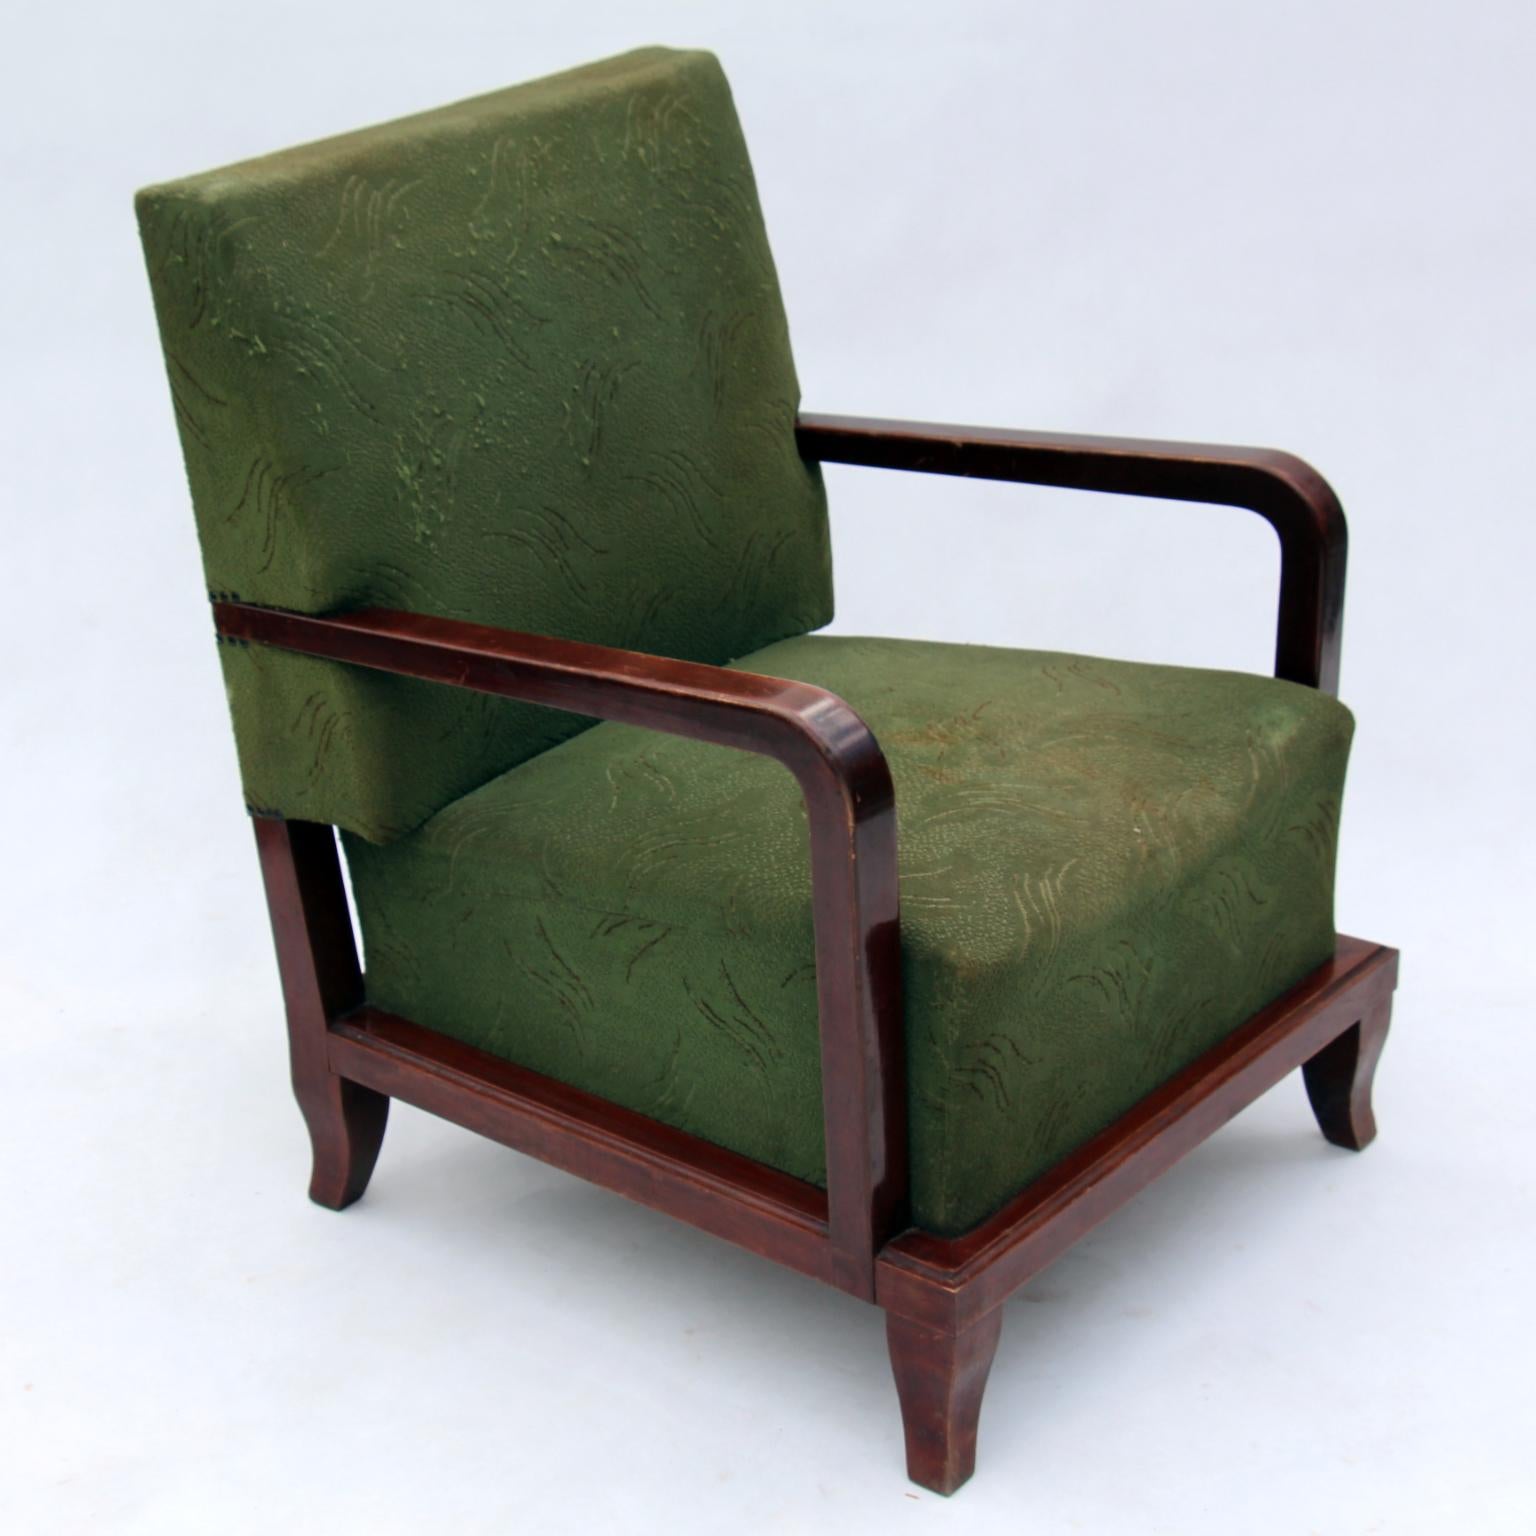 Pair of green Art Deco armchairs, in original condition.